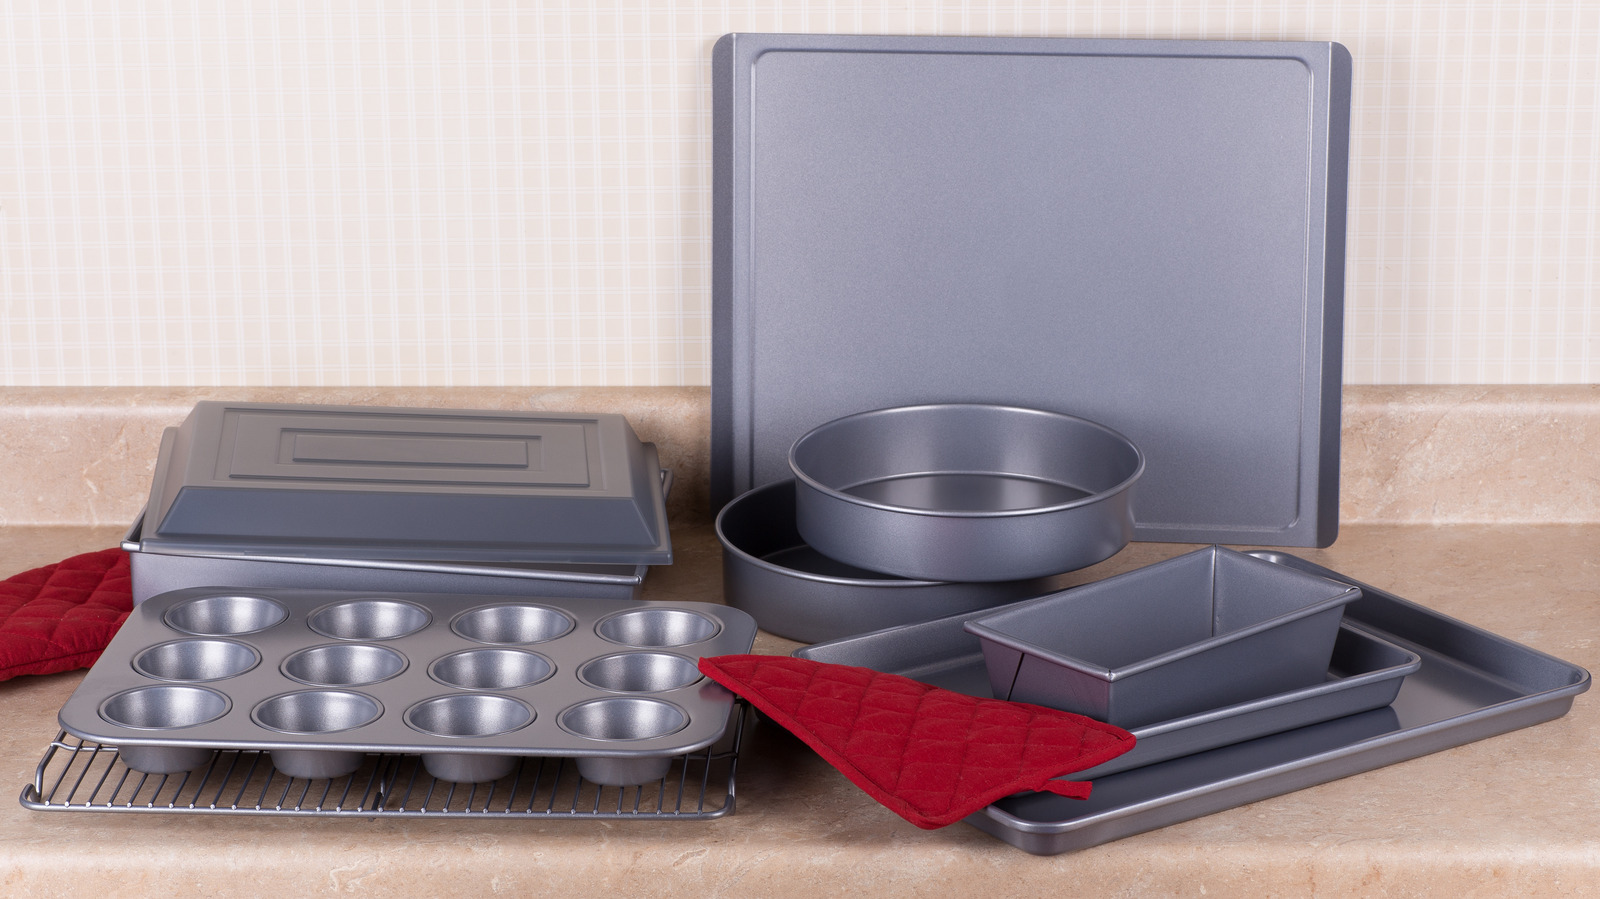 Kinds of Baking Pans to Use When Baking Cookies